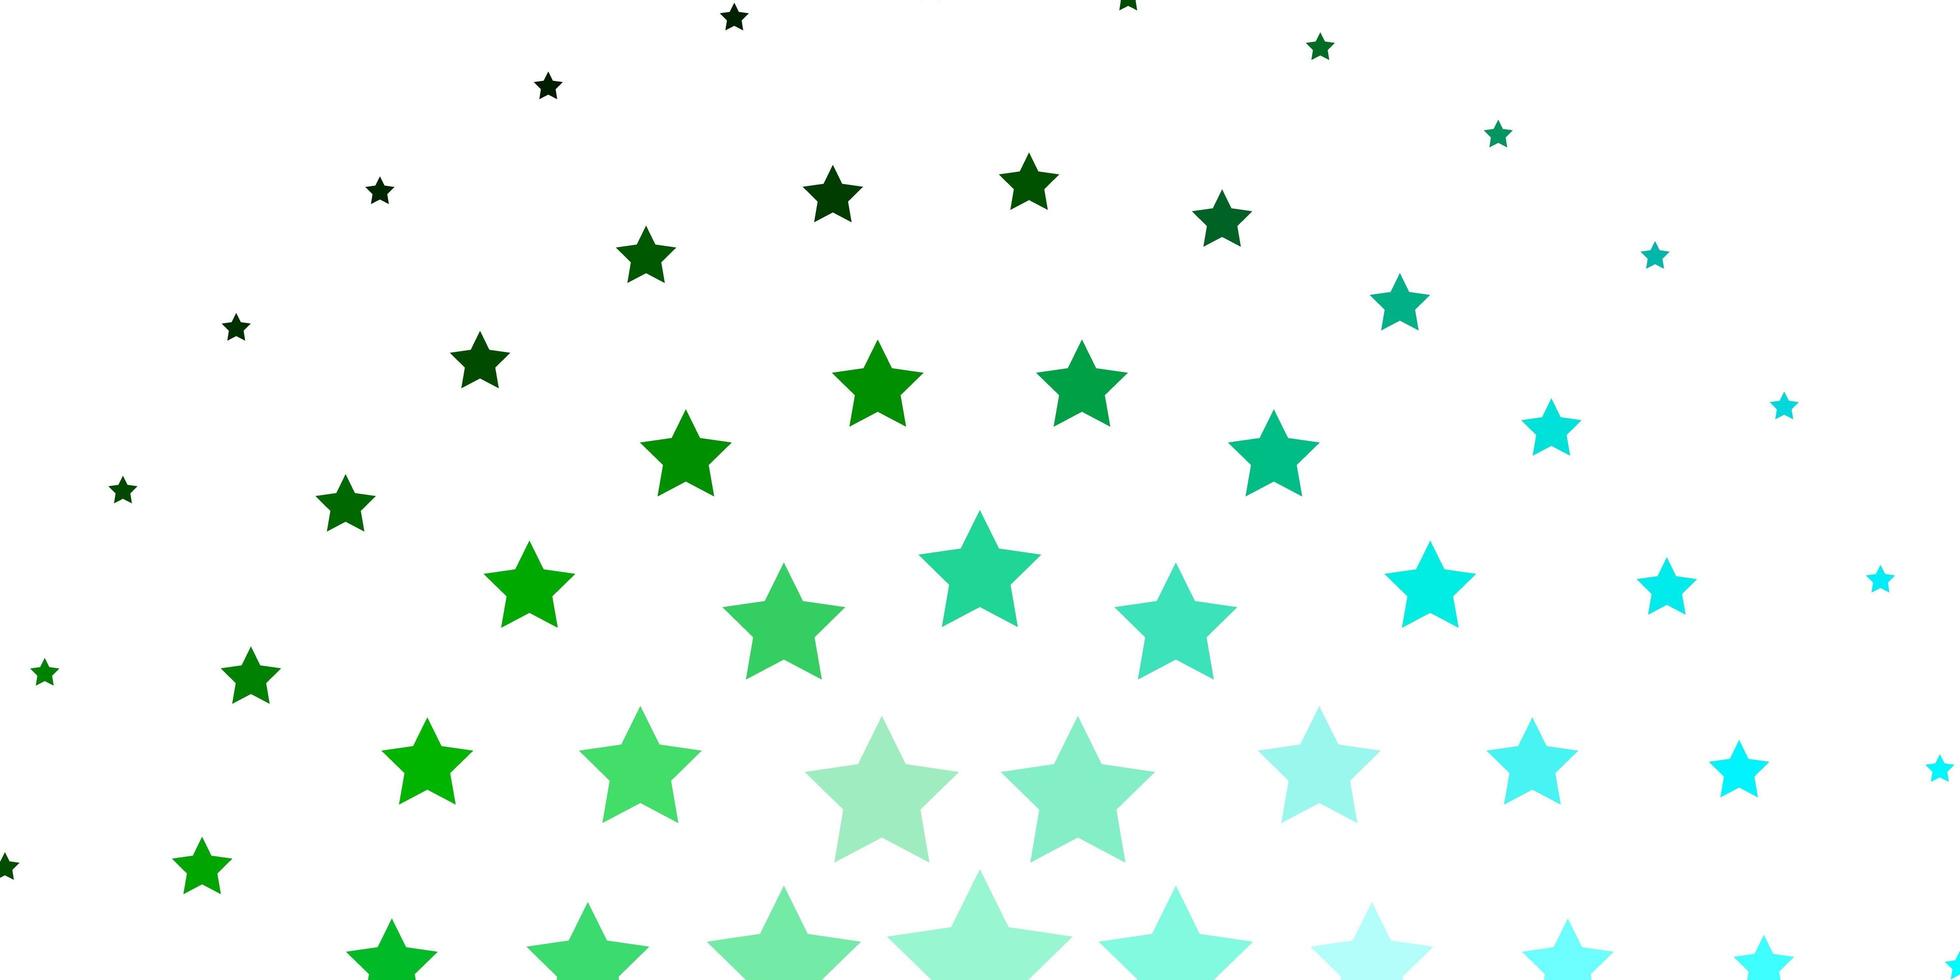 Light Blue, Green vector texture with beautiful stars.